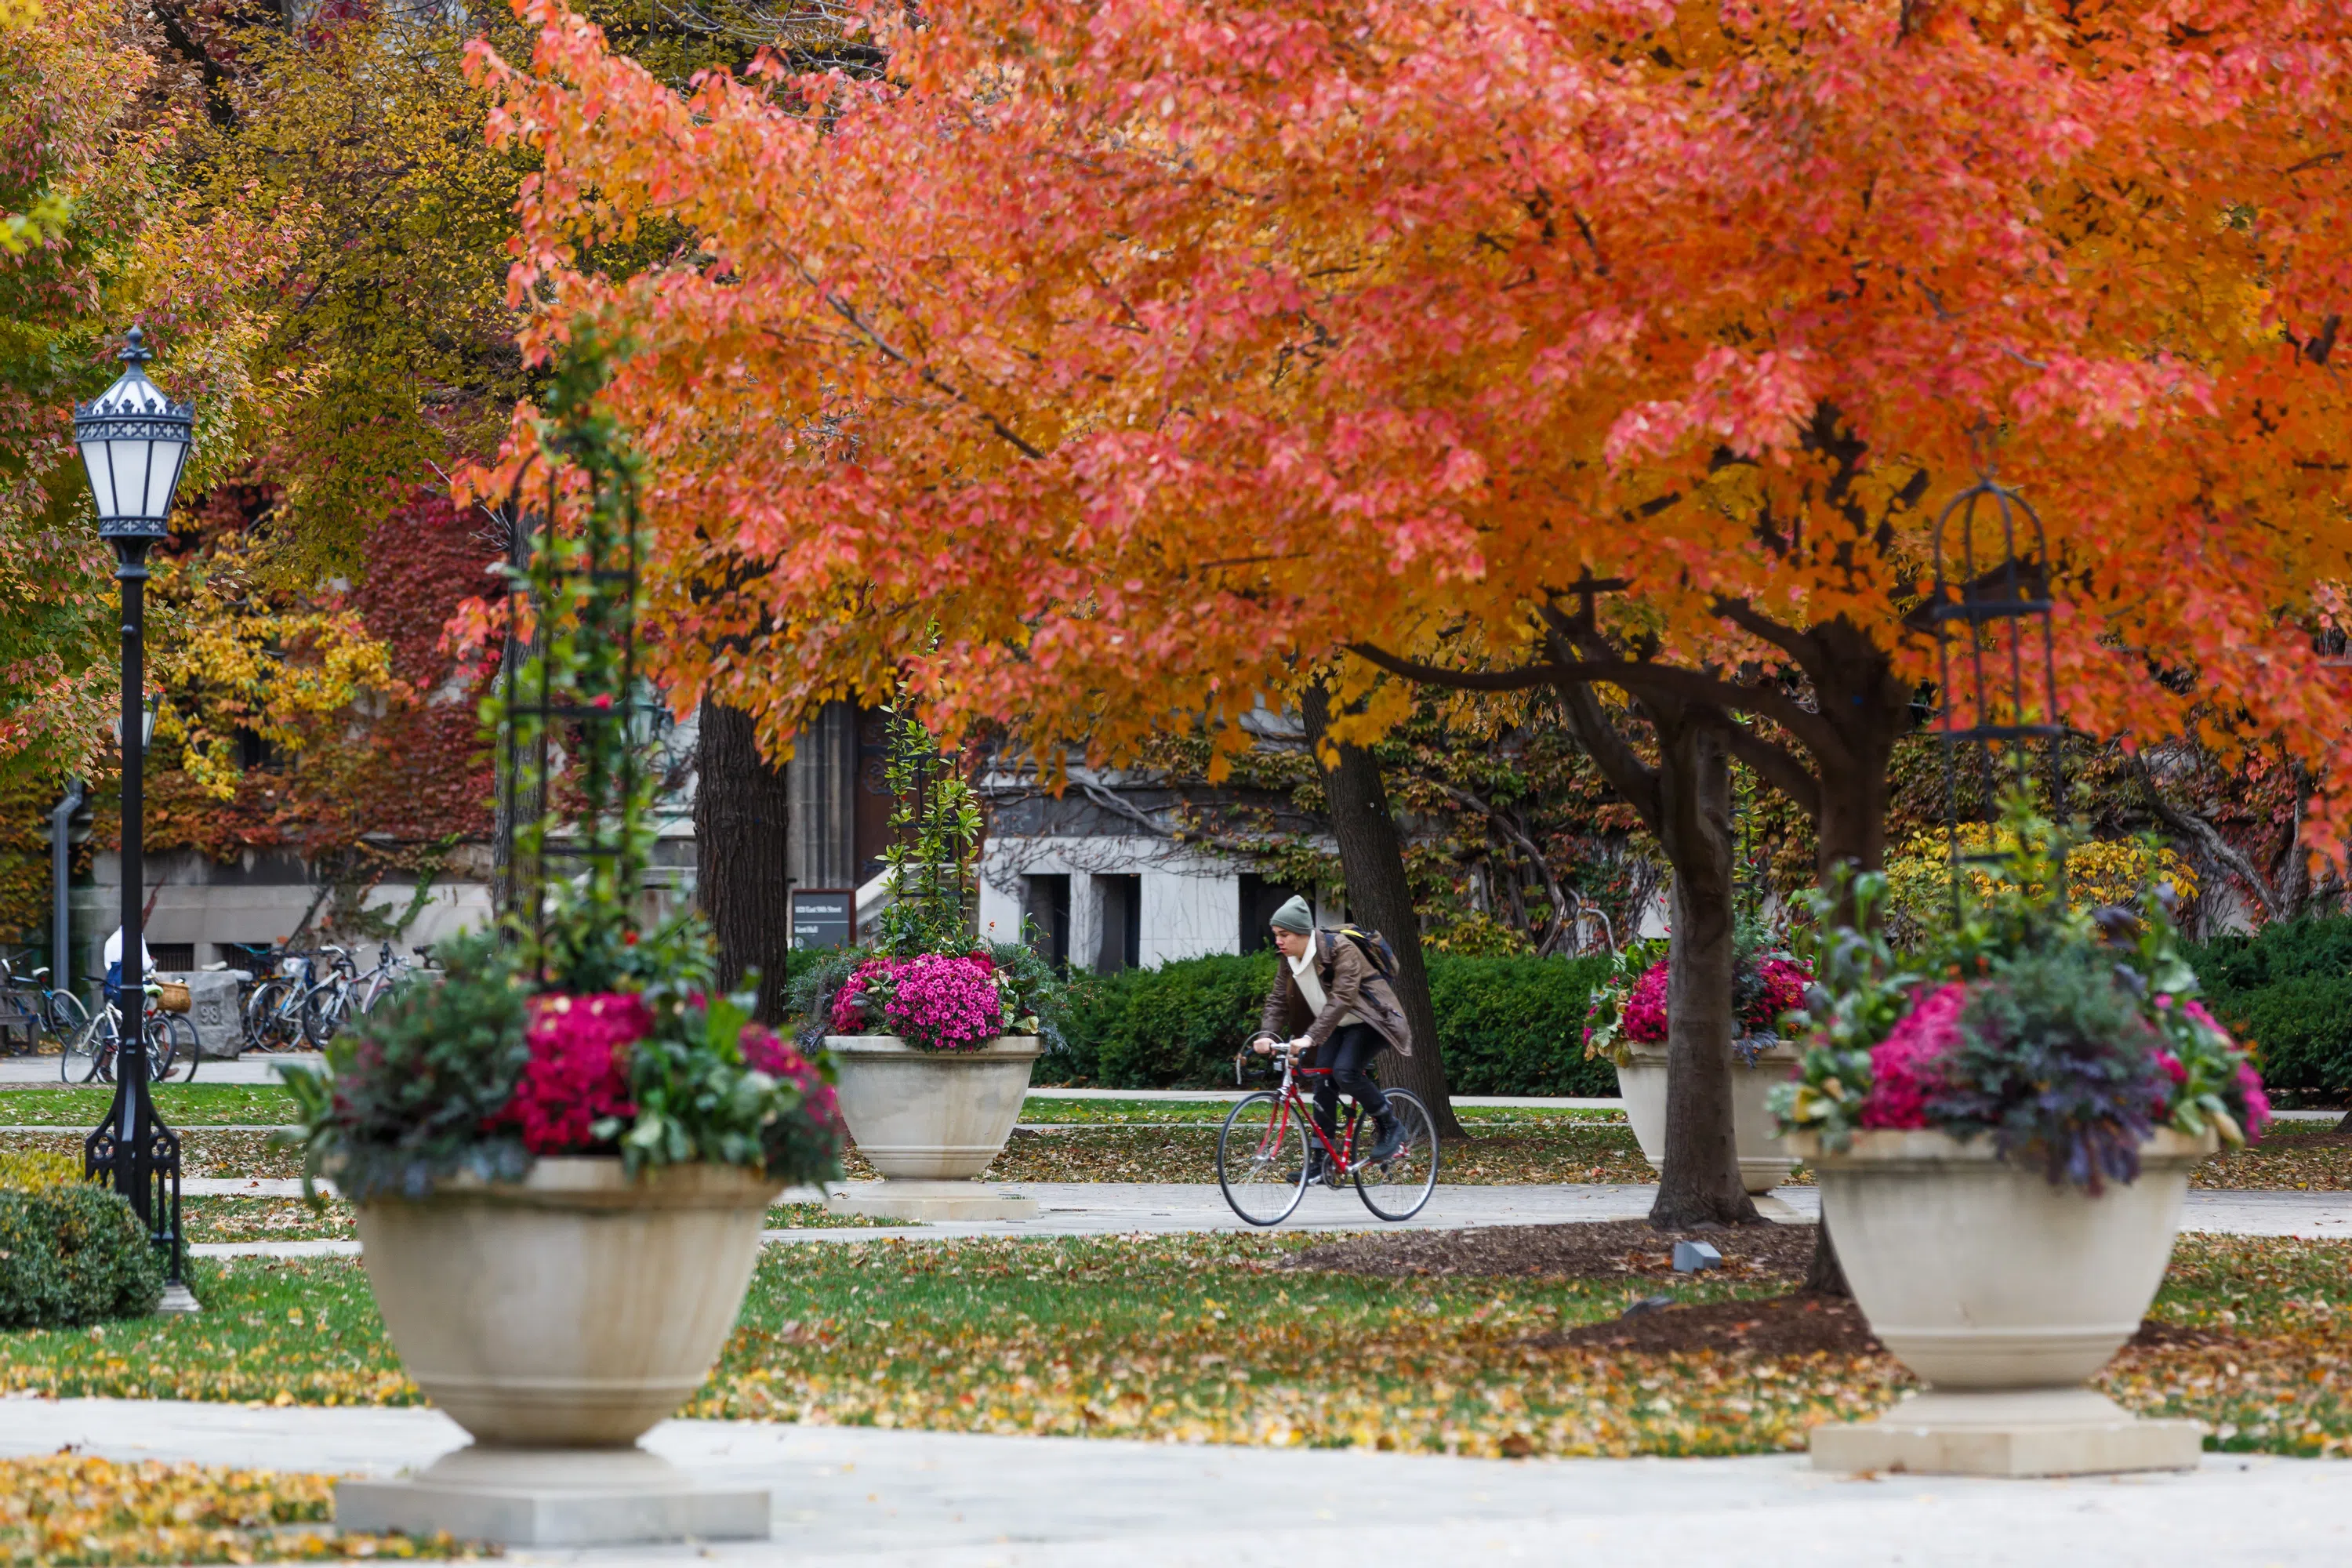 campus in the fall with orange leaves on trees